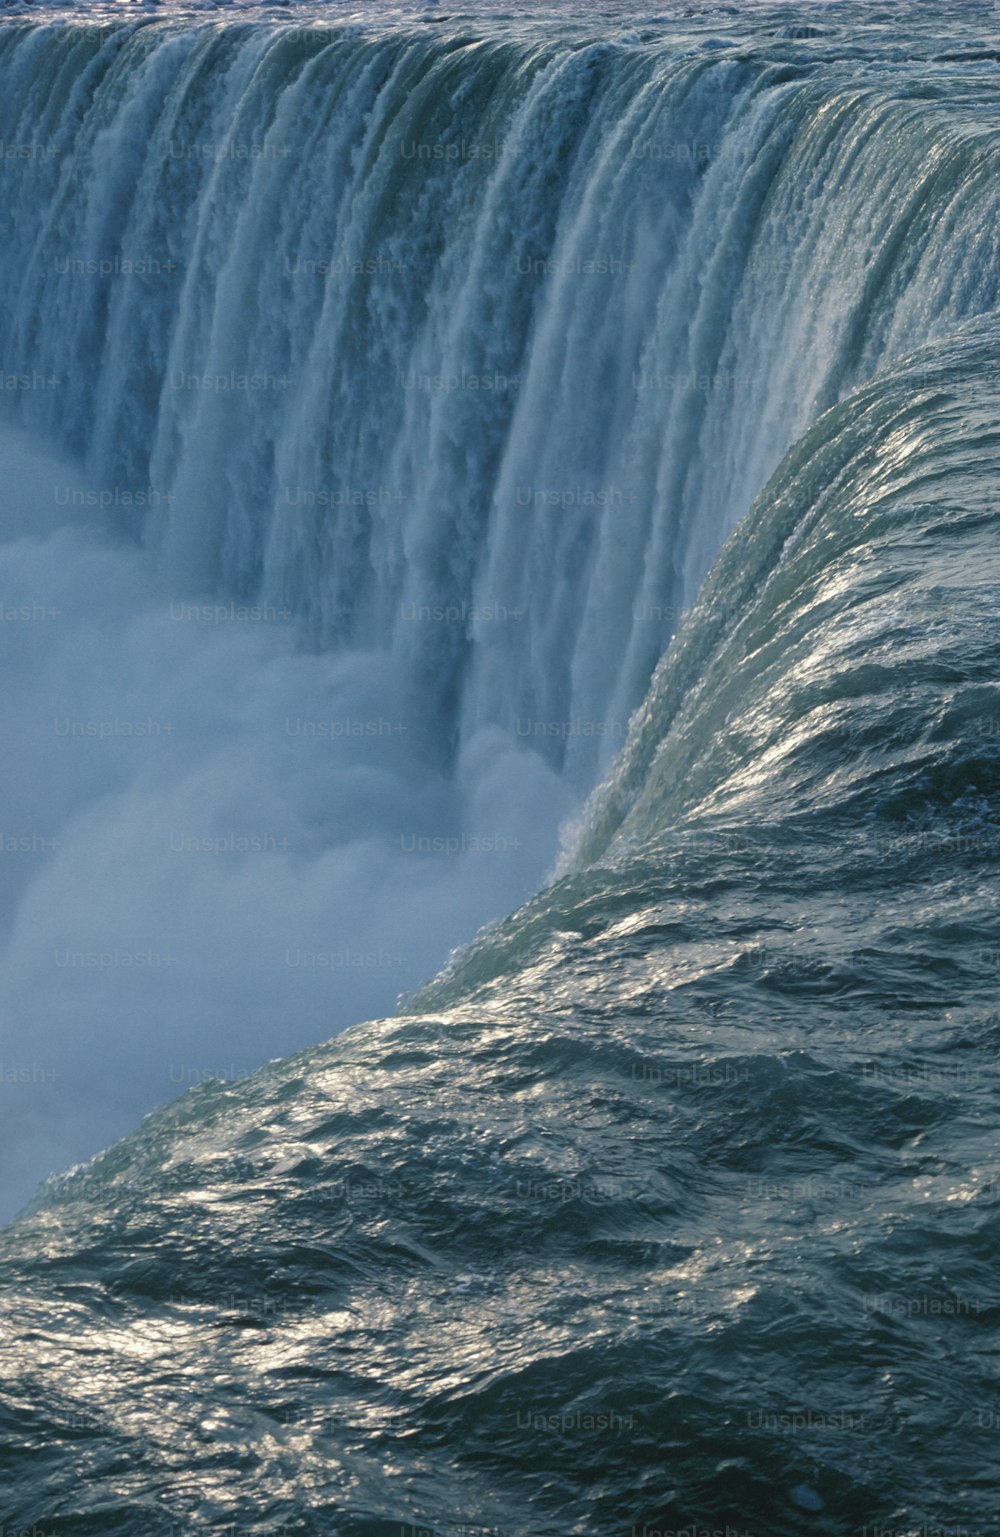 a man riding a surfboard on top of a large waterfall